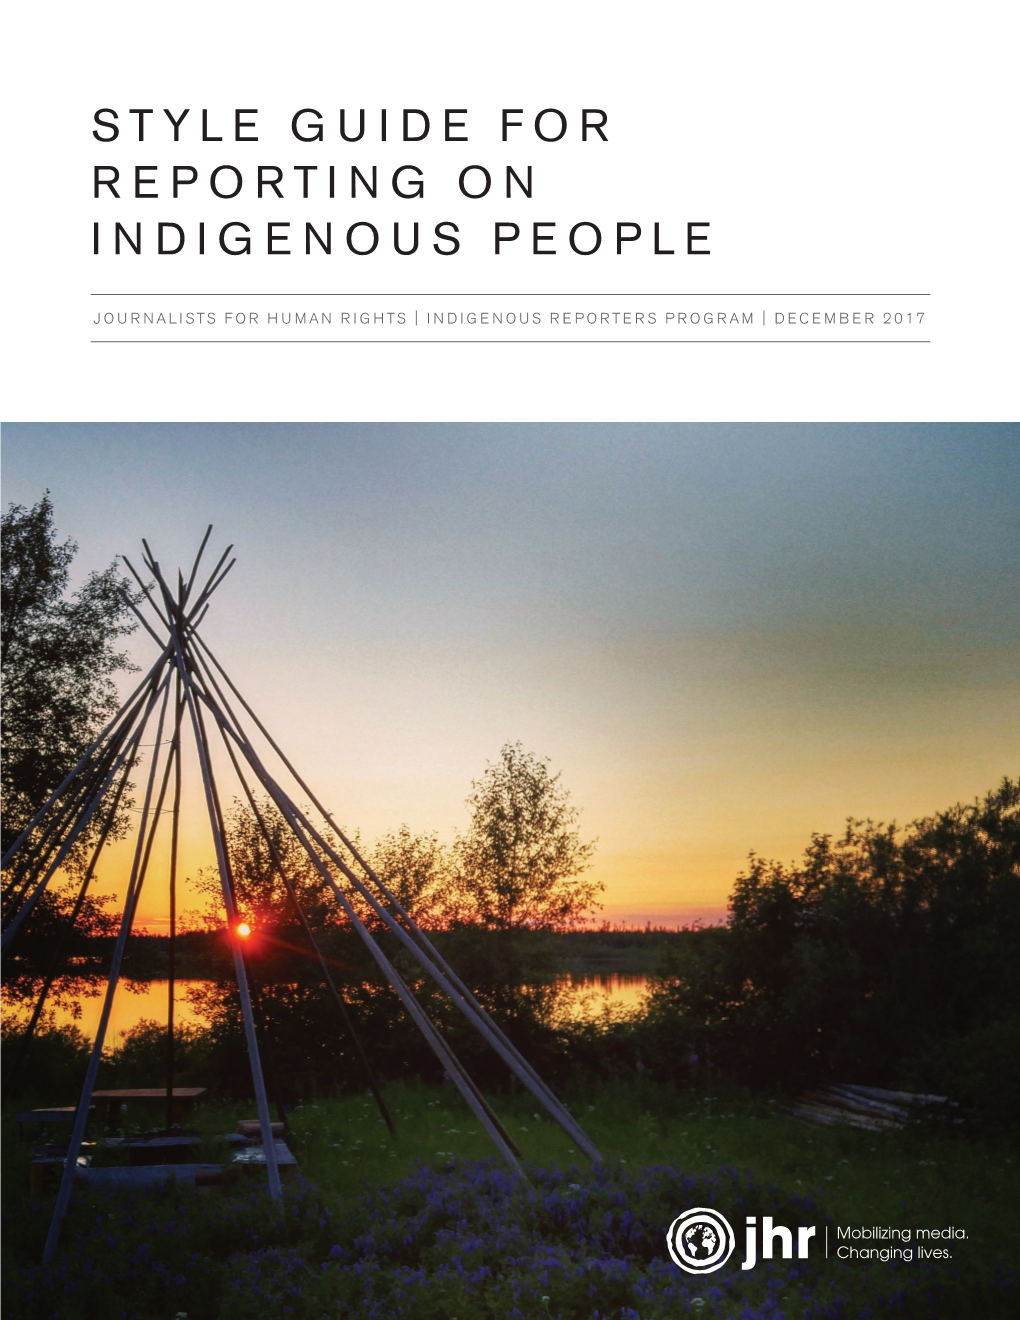 Style Guide for Reporting on Indigenous People